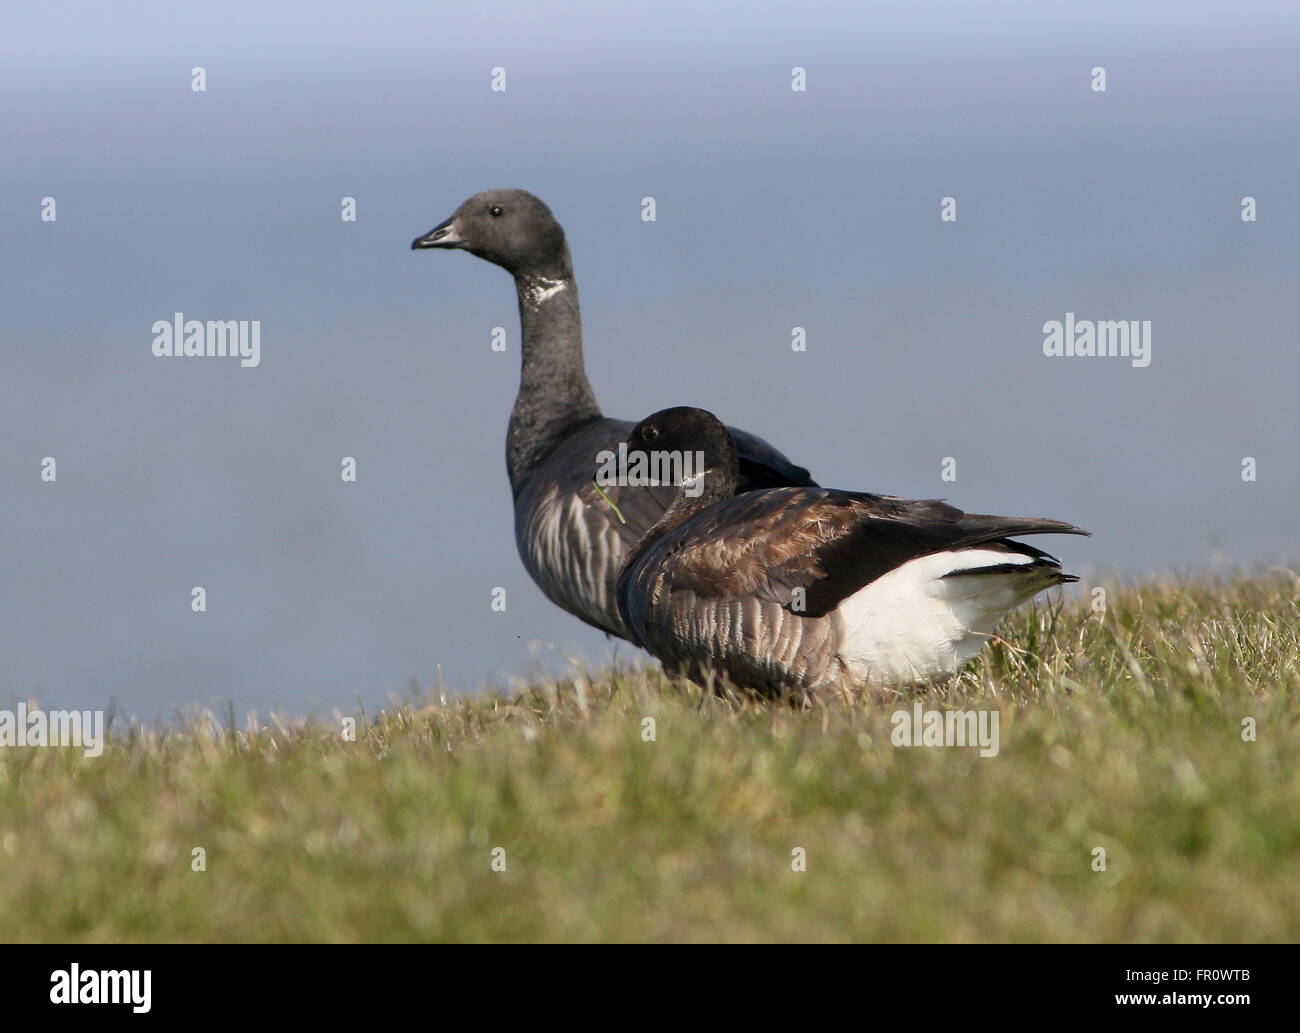 Pair of Dark-bellied Brant Geese (Branta bernicla) in close-up while foraging on a Wadden Sea dike, Northern Netherlands Stock Photo